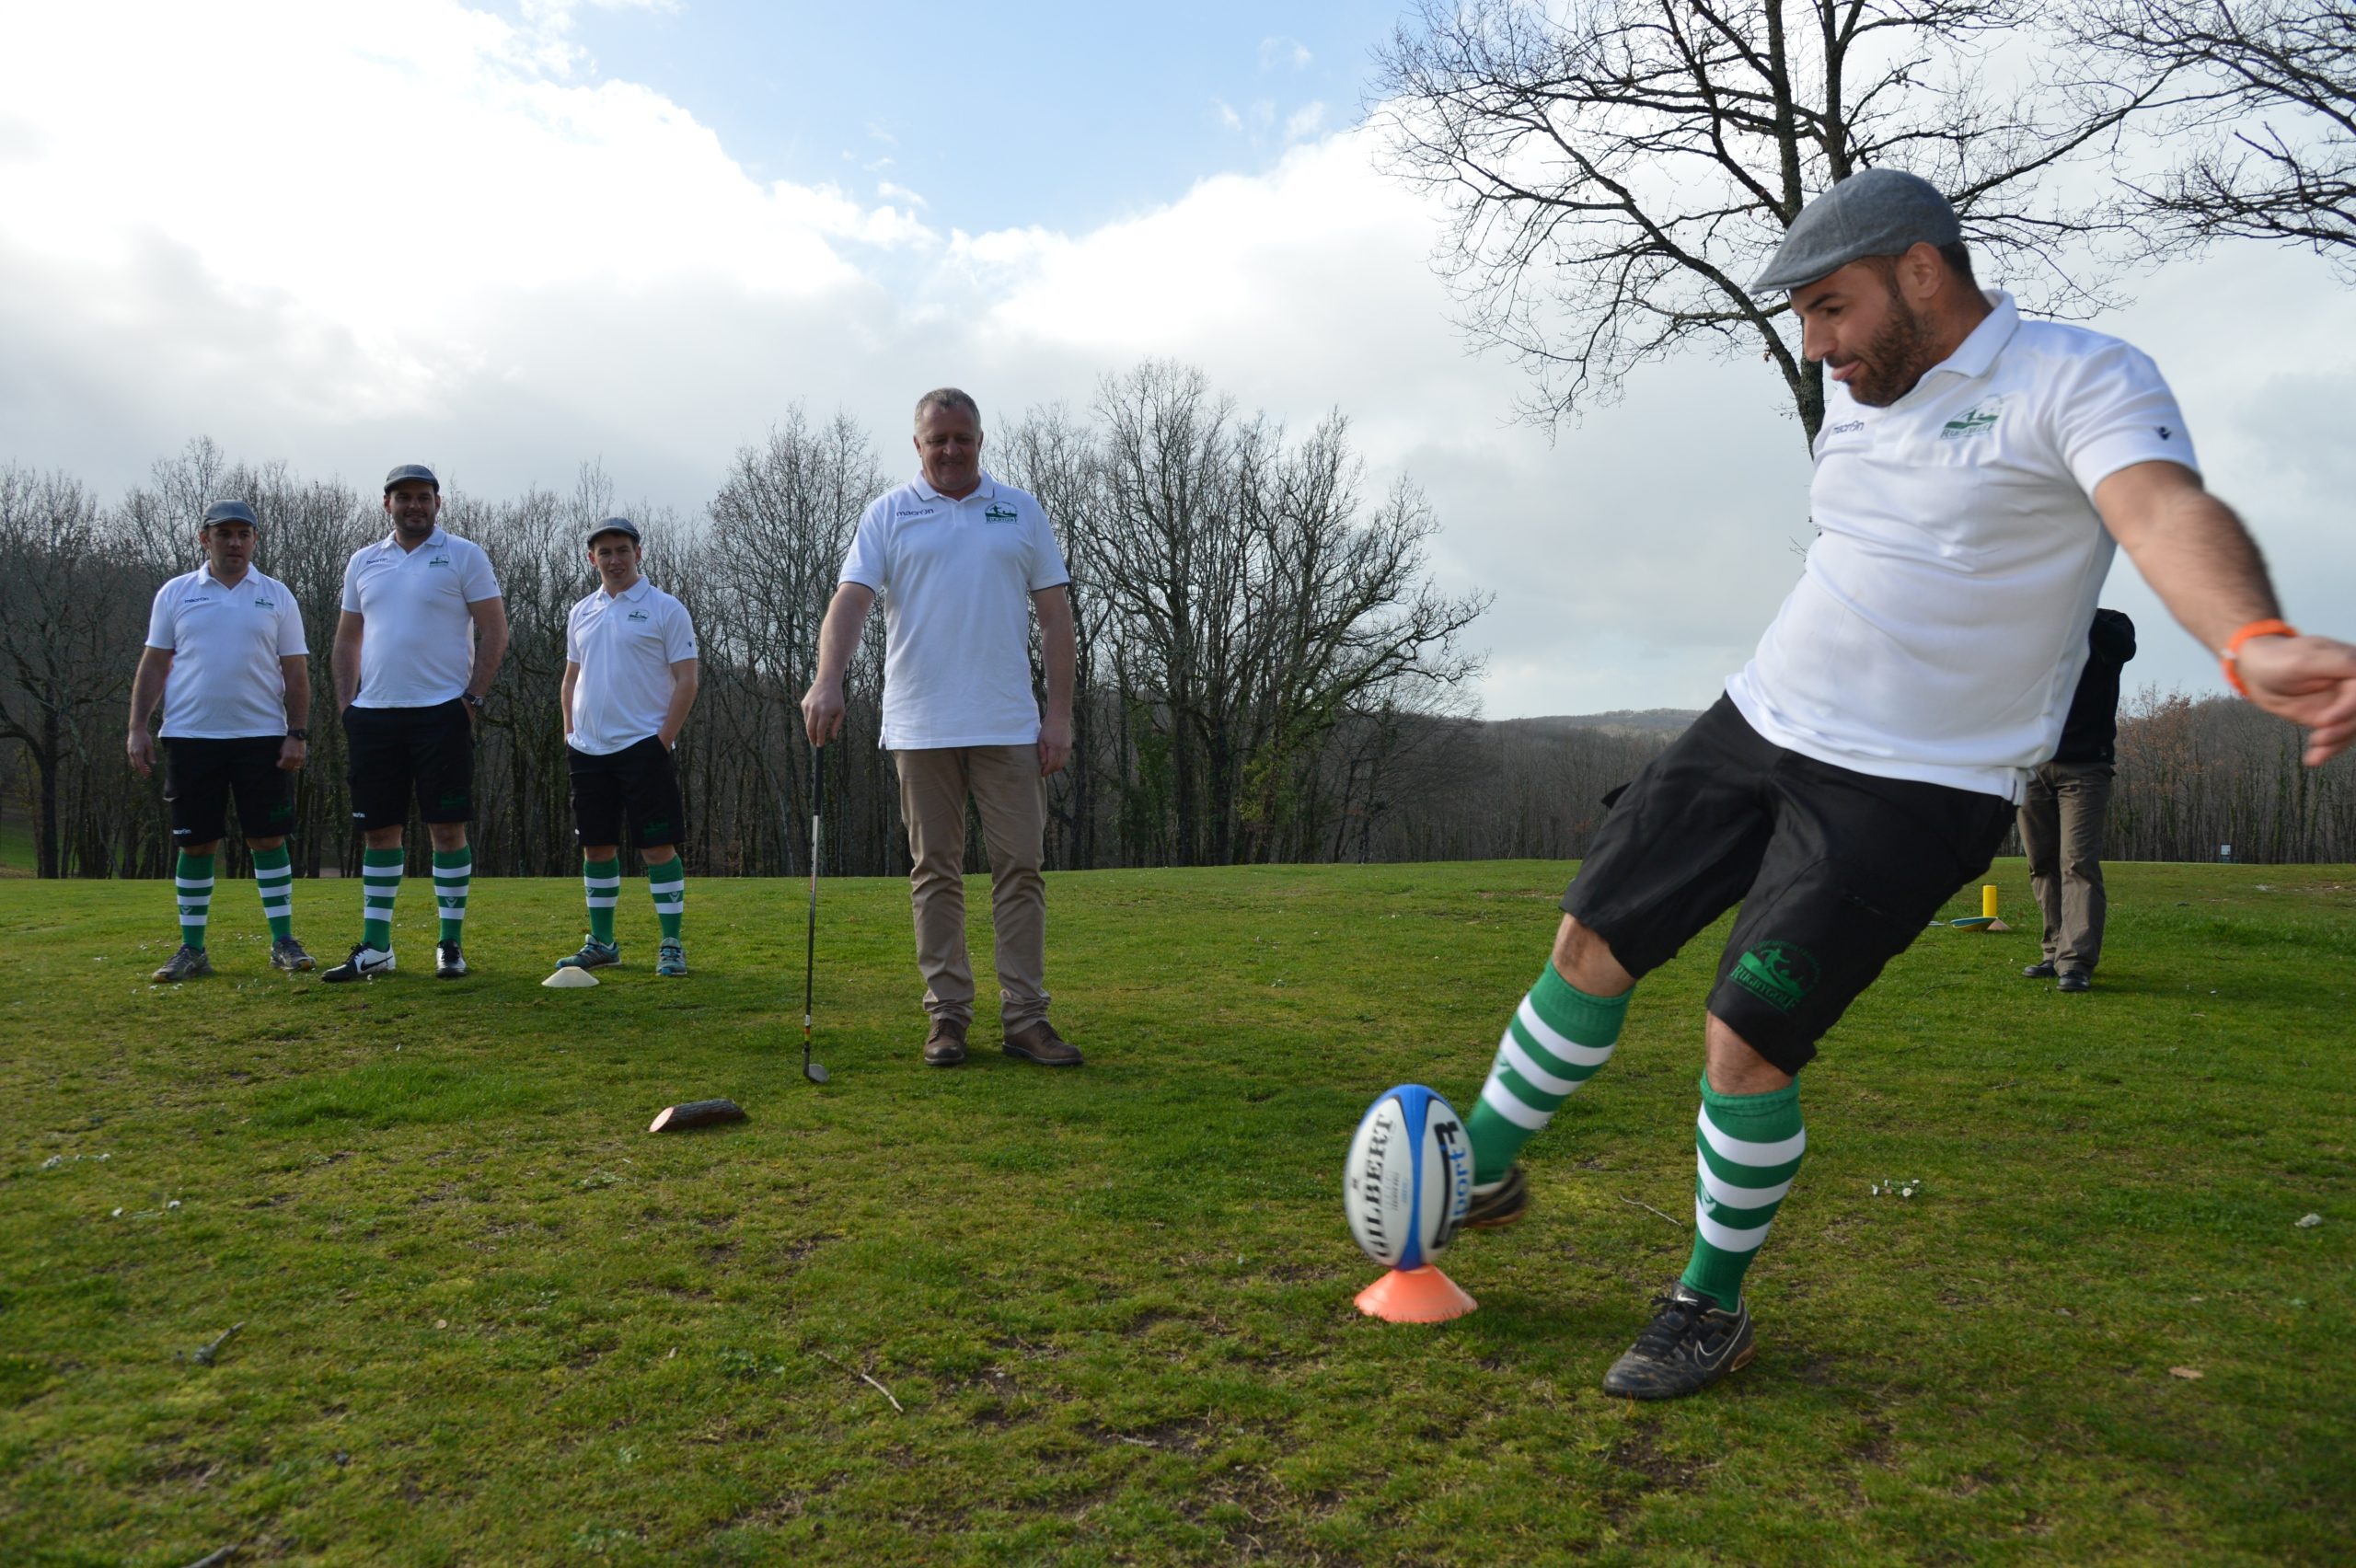 lads playing rugby golf